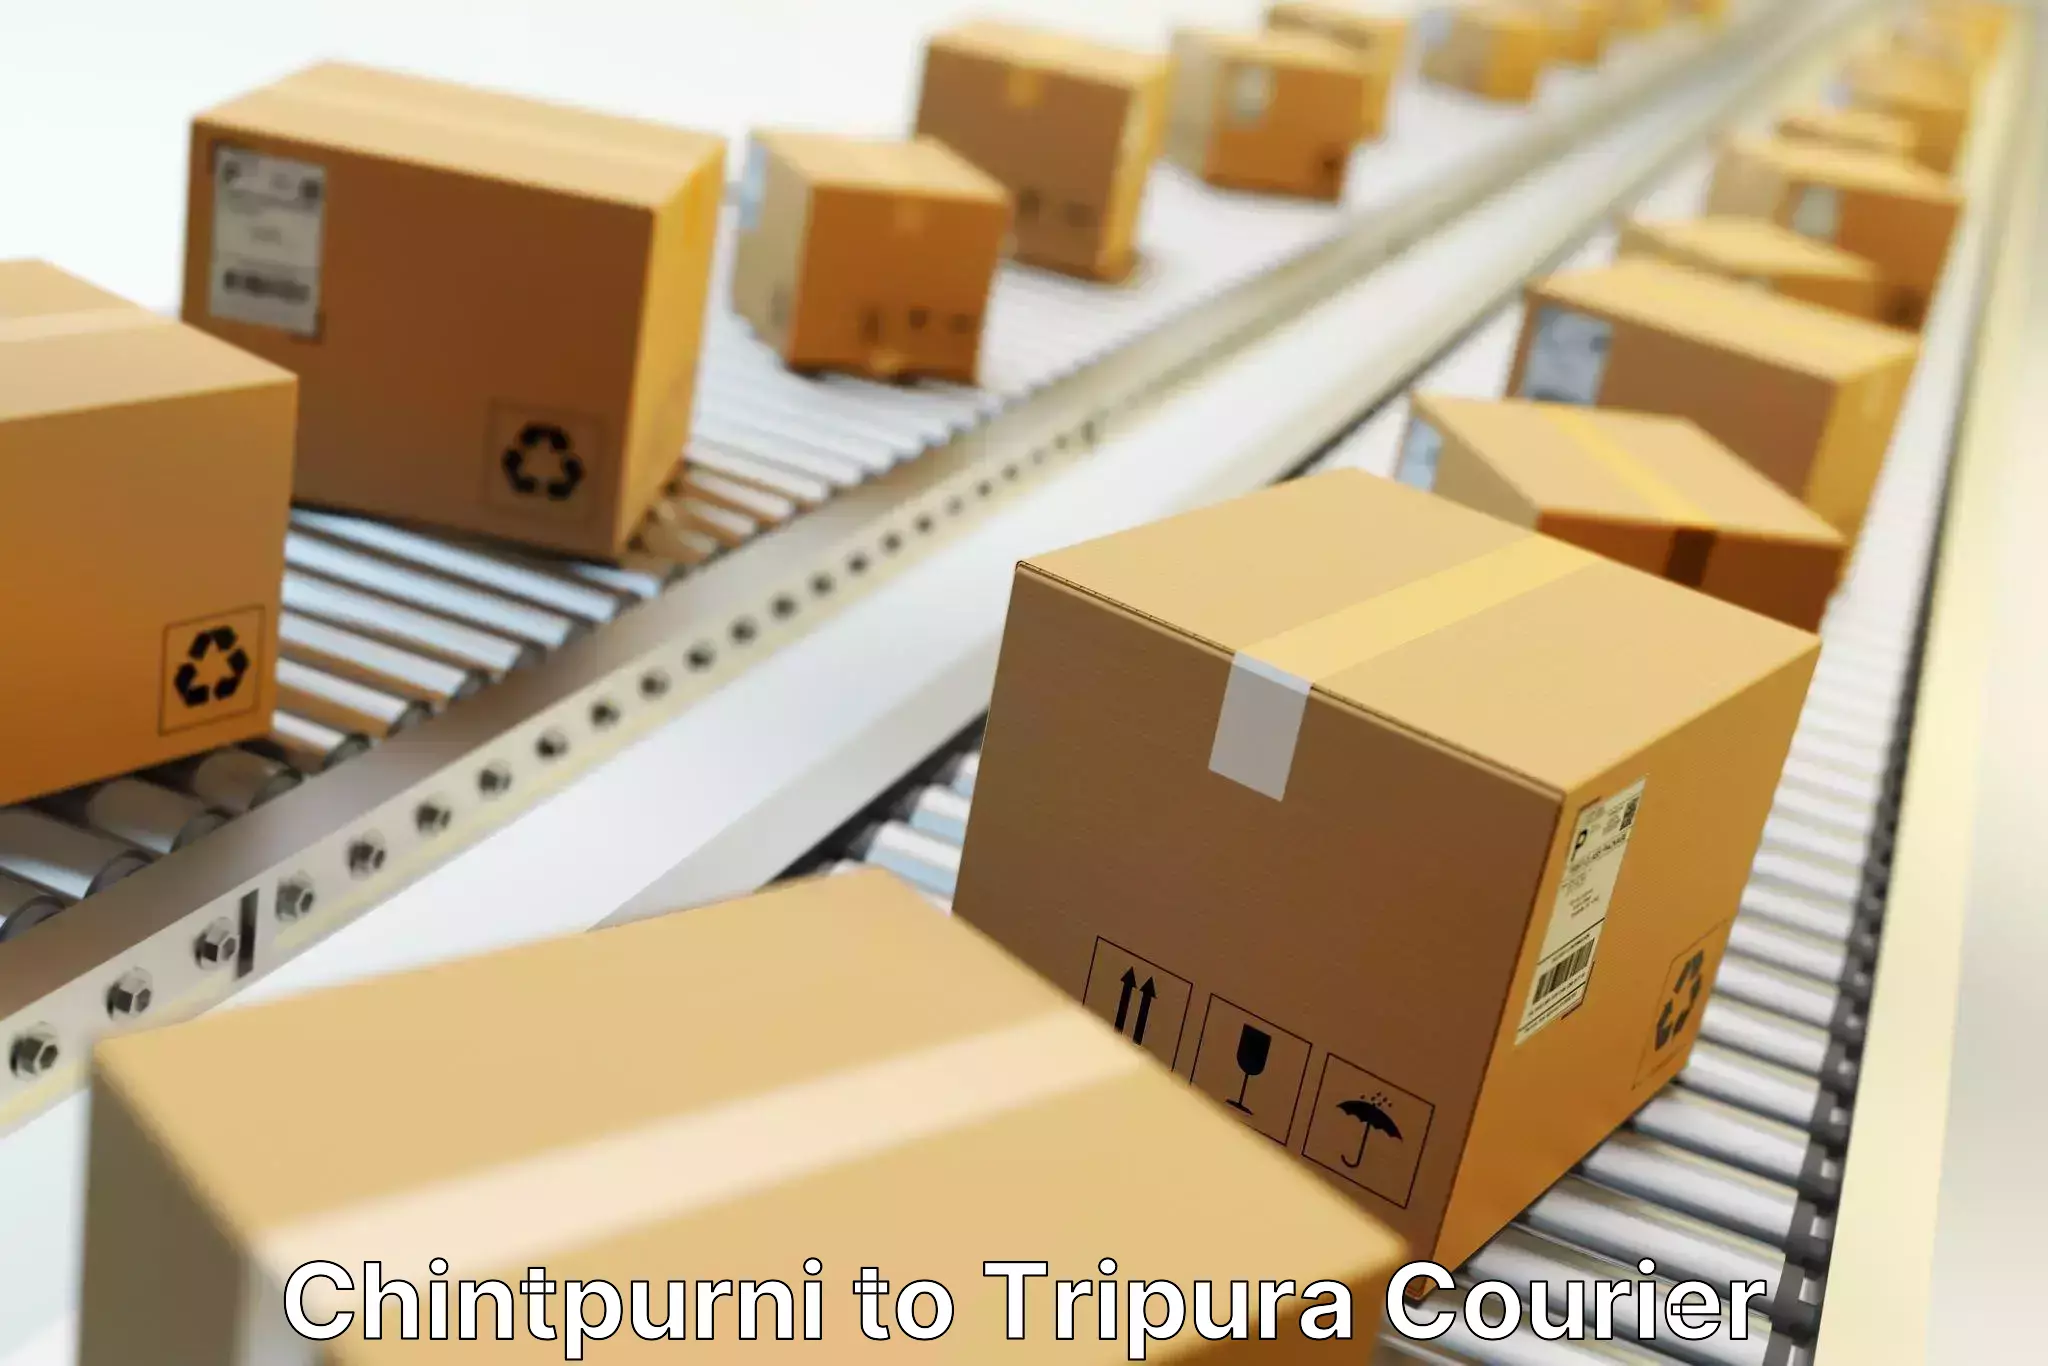 Advanced delivery network Chintpurni to Udaipur Tripura